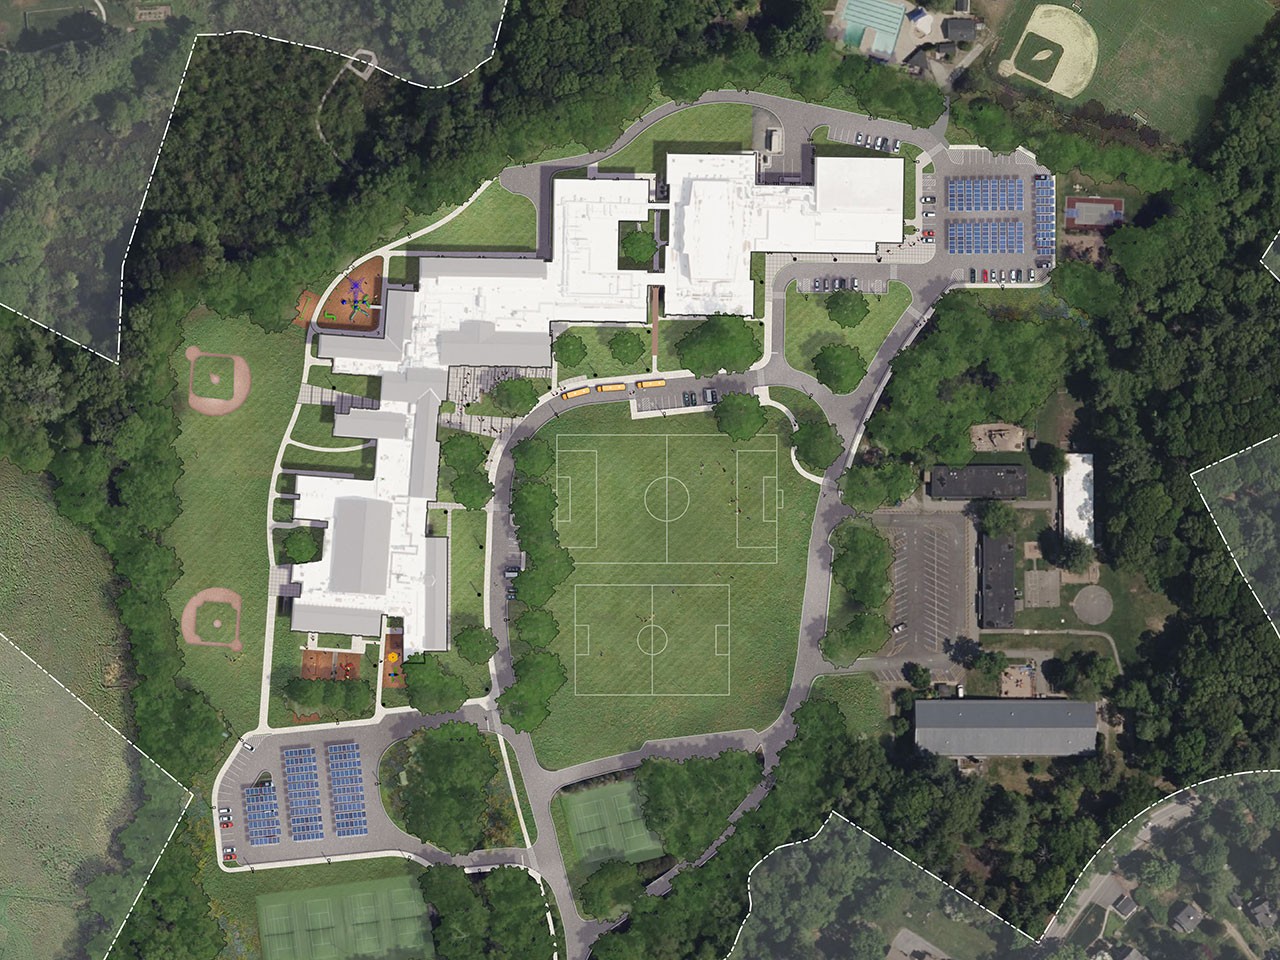 Site Map of the Lincoln School in Lincoln, MA